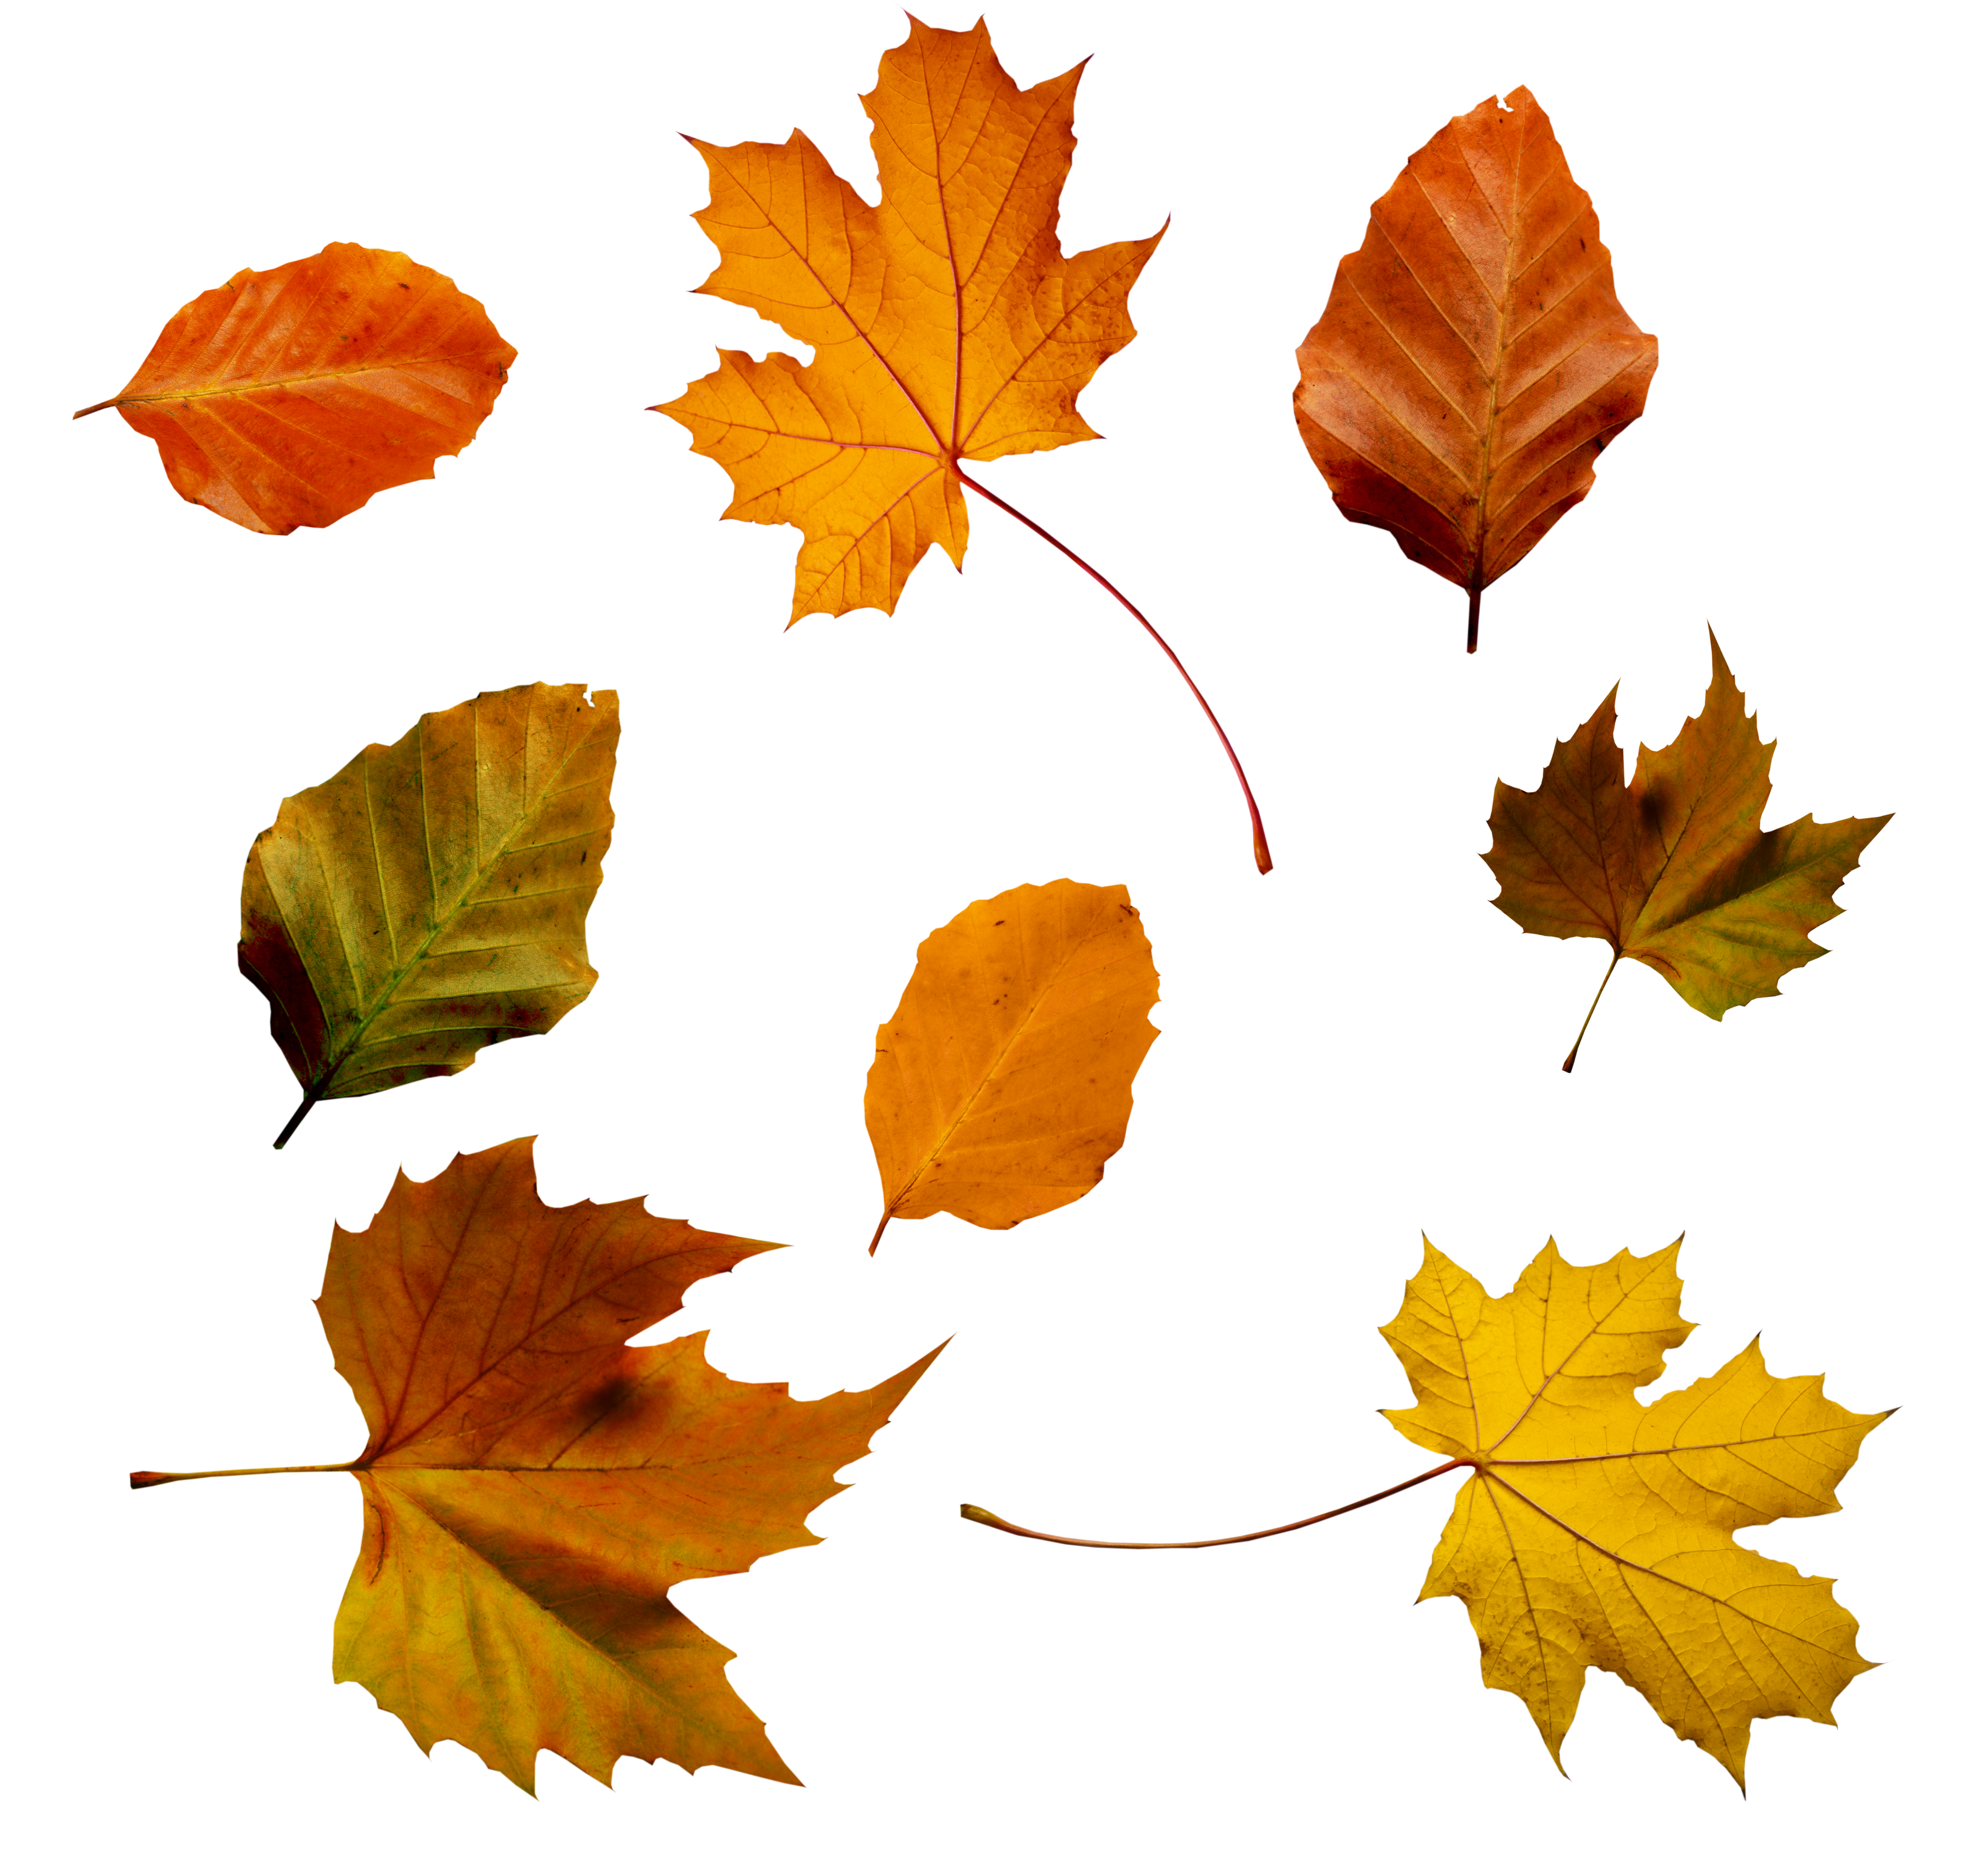 Photosynthesis - why do leaves change colors in the fall?